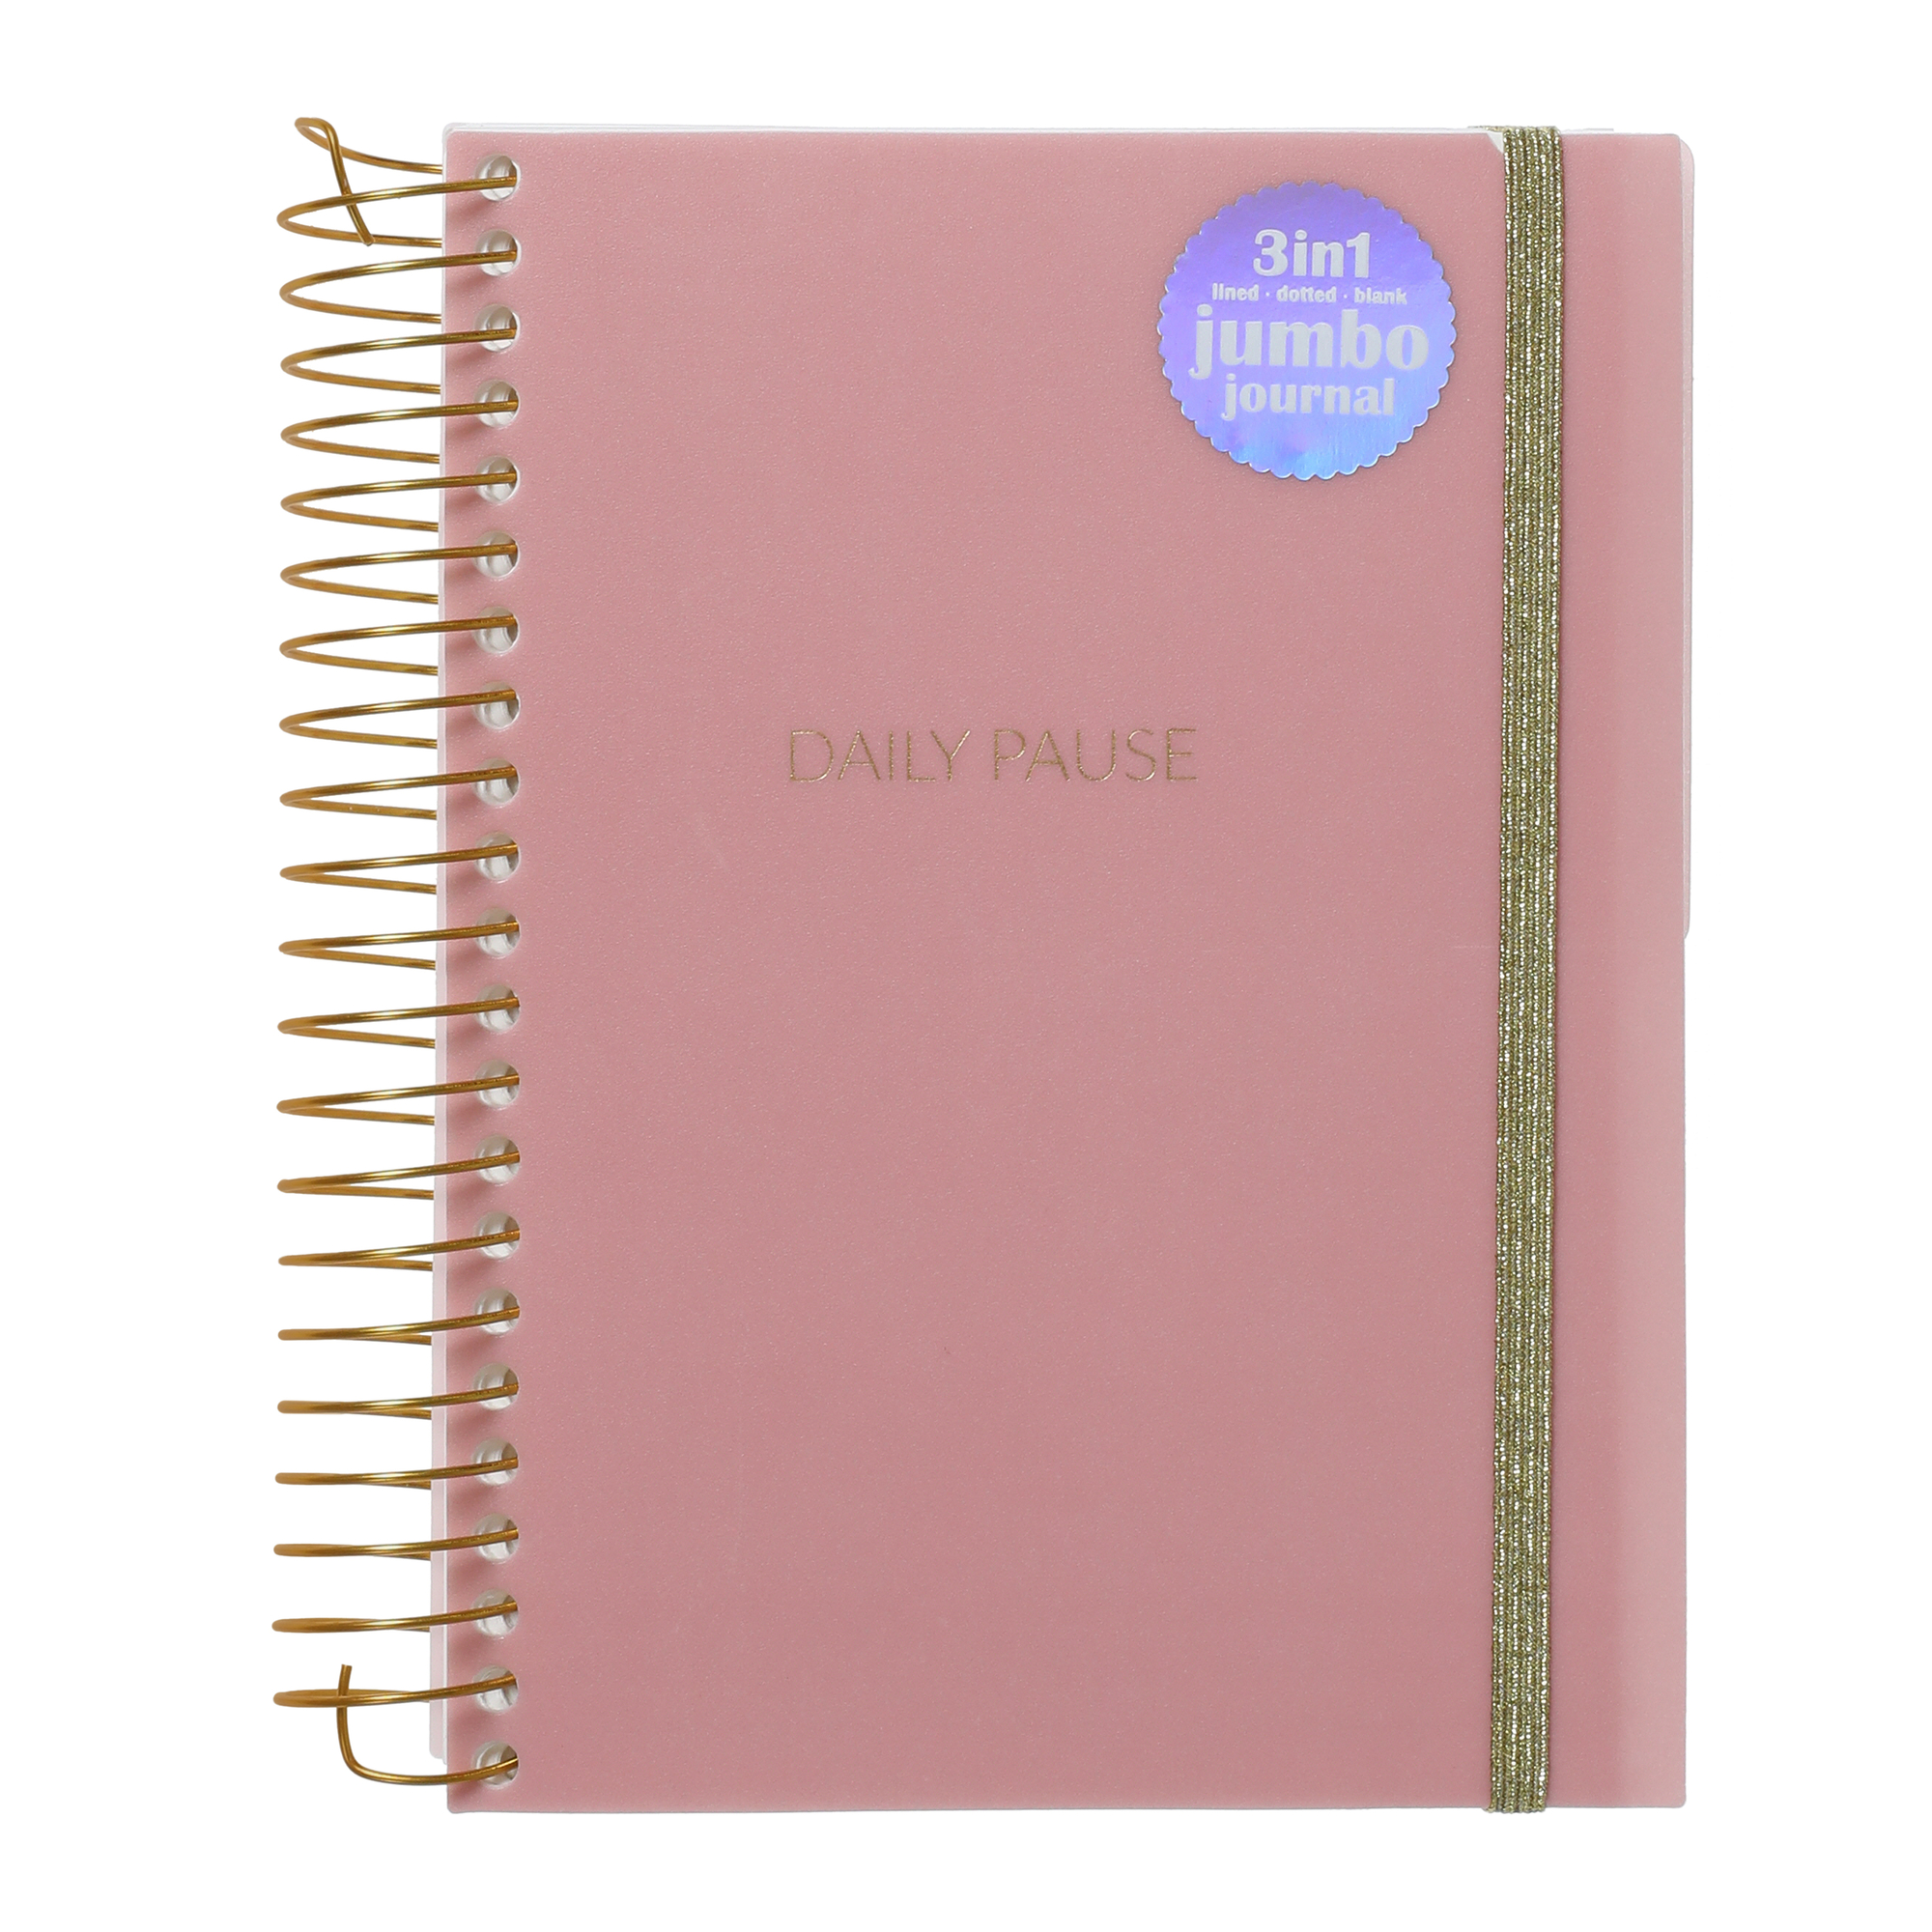 3-in-1 jumbo spiral journal with dotted, lined & blank pages